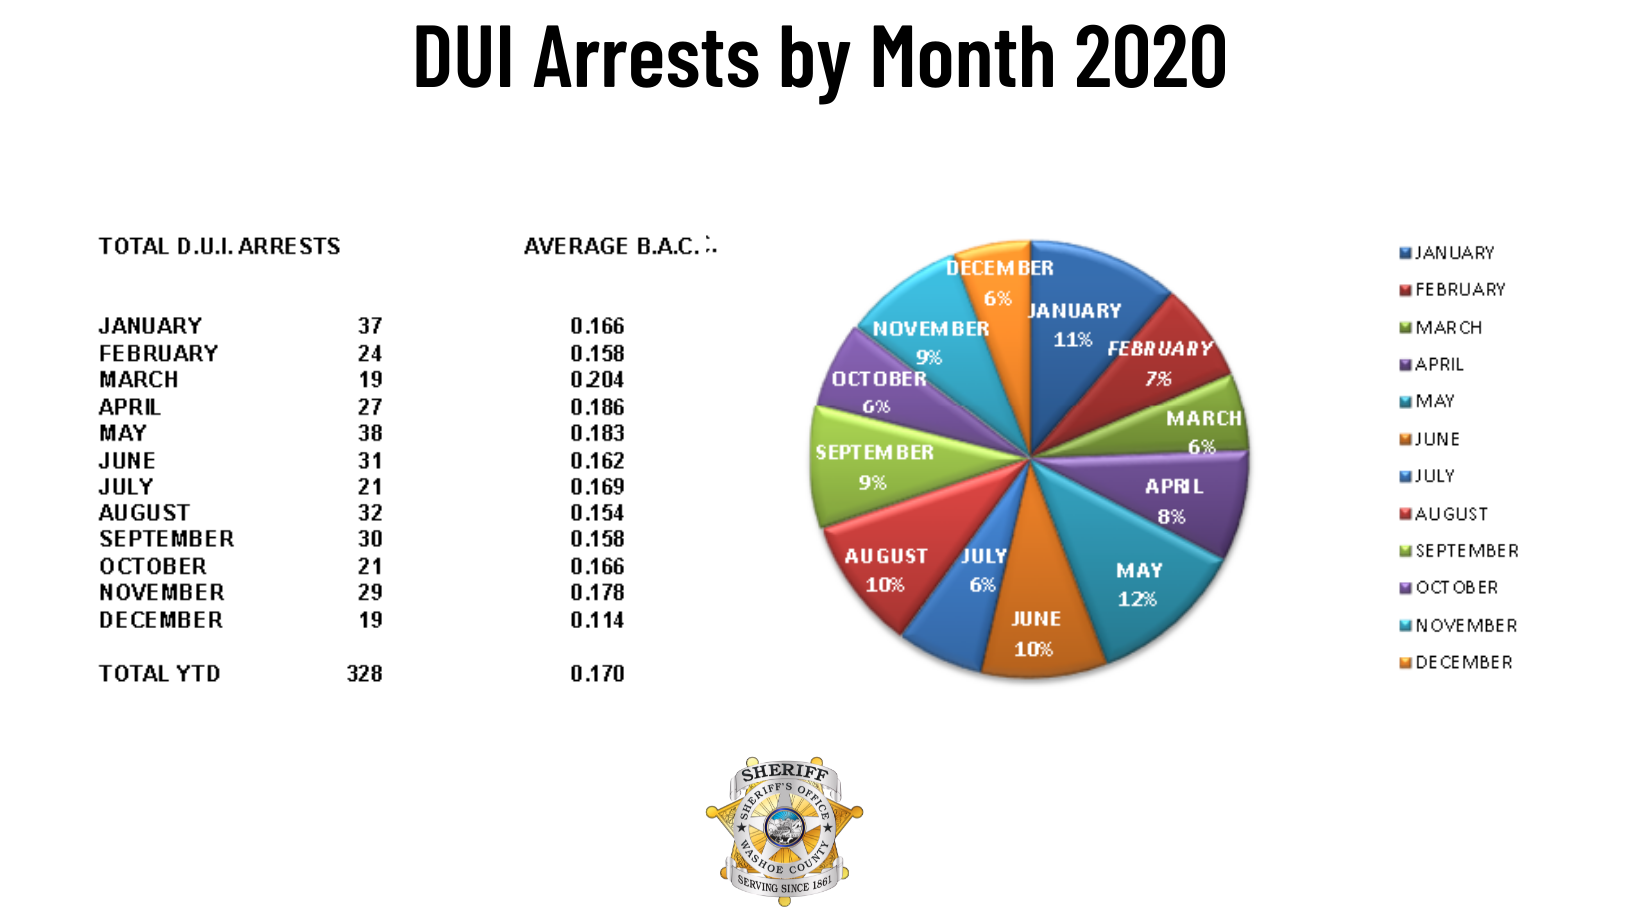 DUI-Arrests-by-Month-2020-CANVA.png